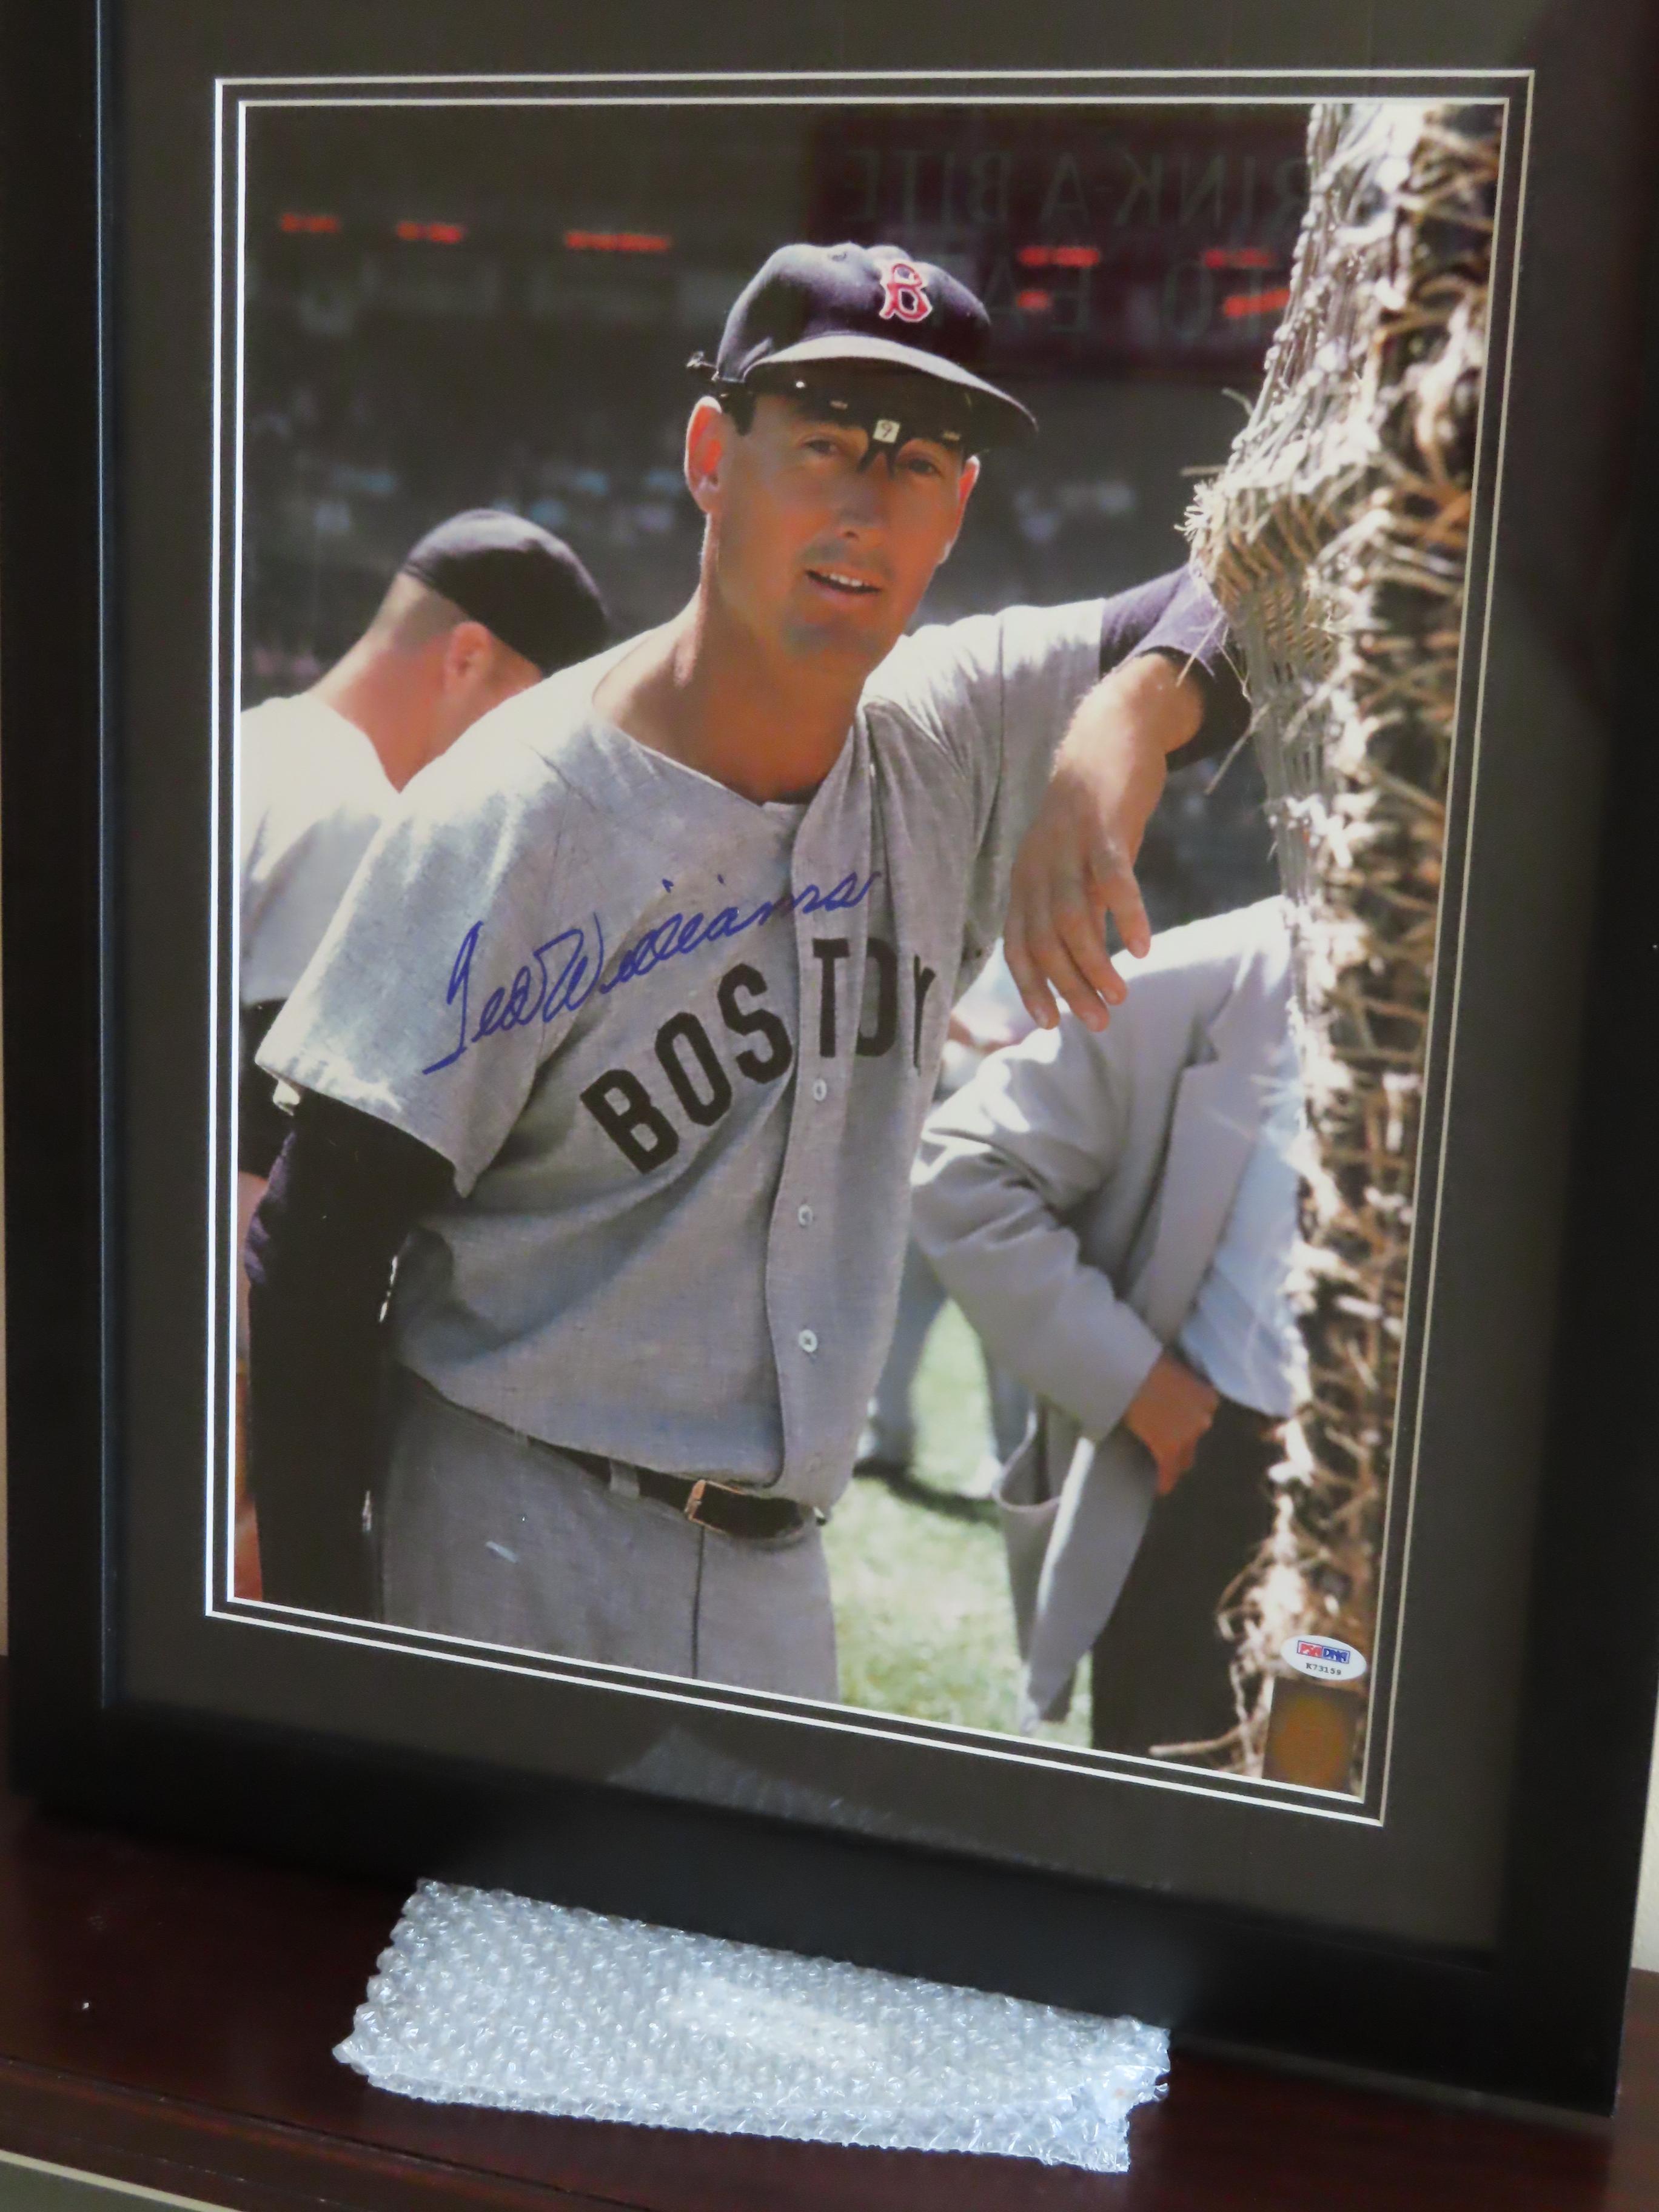 Ted Williams Signed 16"x20" Photo, Matted and Framed to 25.5" x21.5", $69 Shipping. Guaranteed Auth.